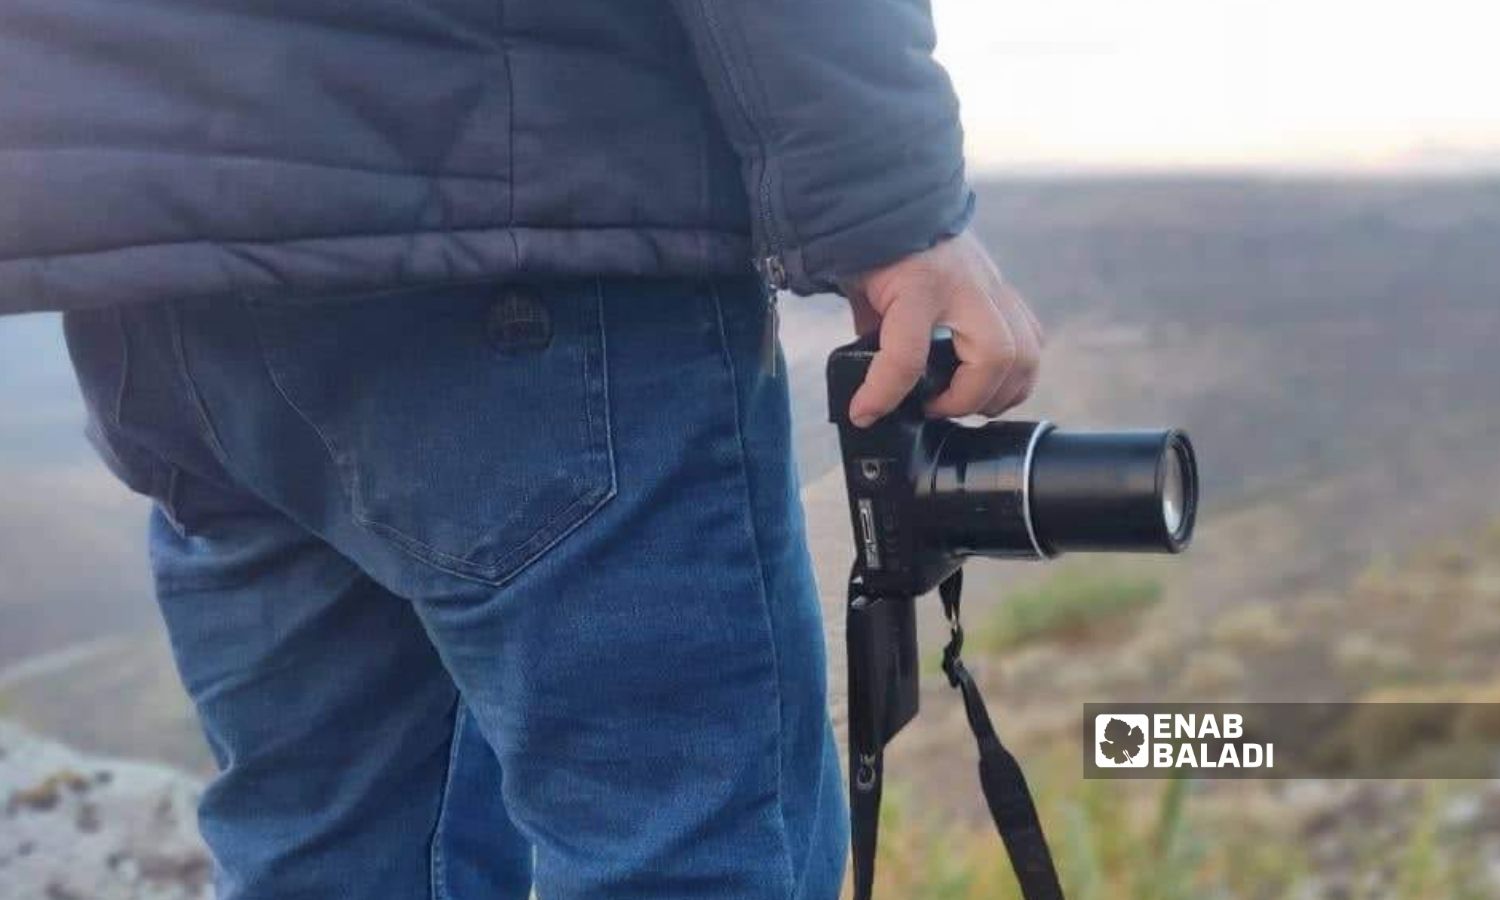 Daraa: Local Journalists Under Security Threats for Covering Reality